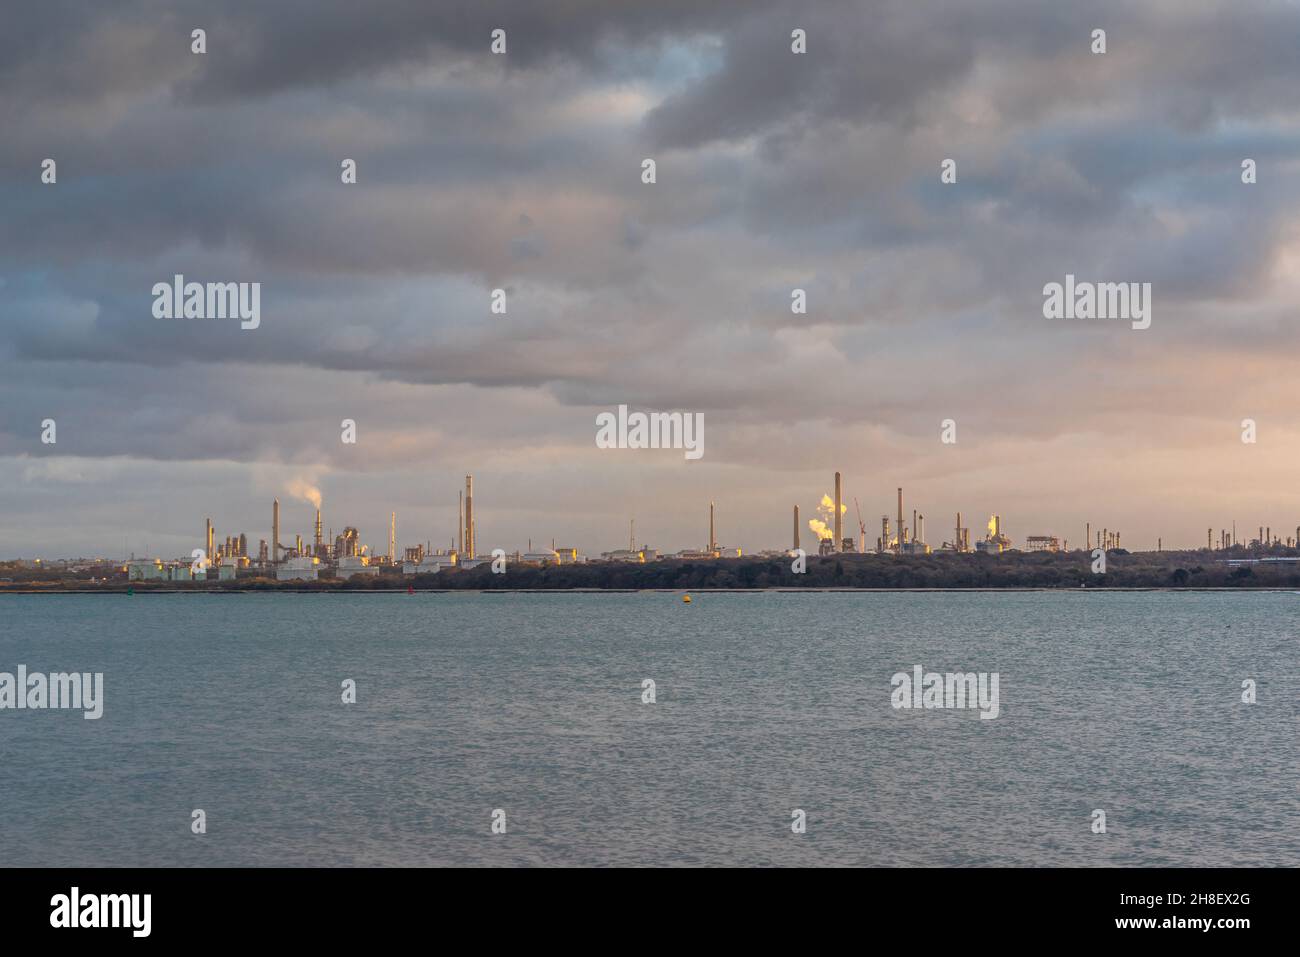 Fawley Oil Refinery during sunset as seen from Netley, Southampton, Hampshire, England, UK Stock Photo